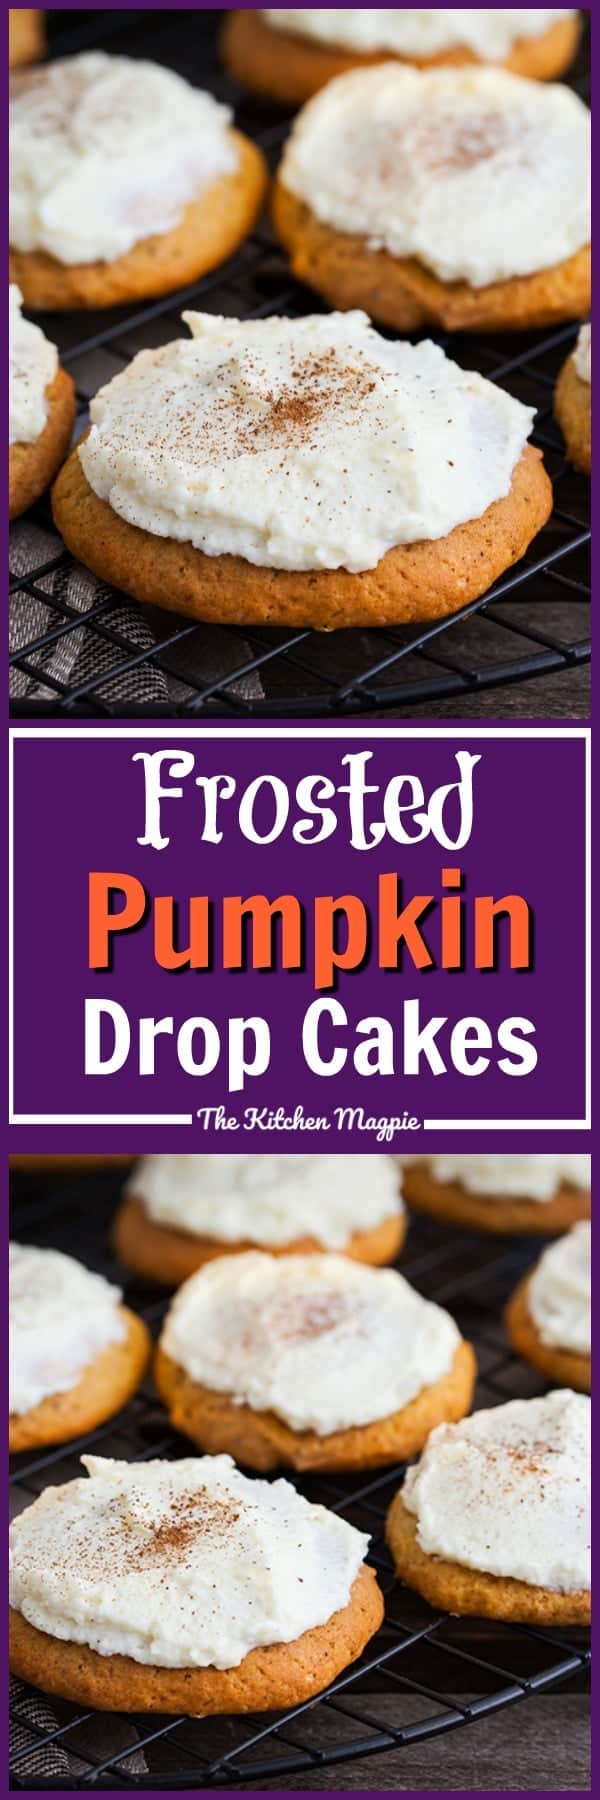 Frosted Pumpkin Drop Cakes! These cakey cookies are frosted with the BEST buttercream icing ever! Recipe from @kitchenmagpie #cookies #pumpkin #recipe #frosting #icing